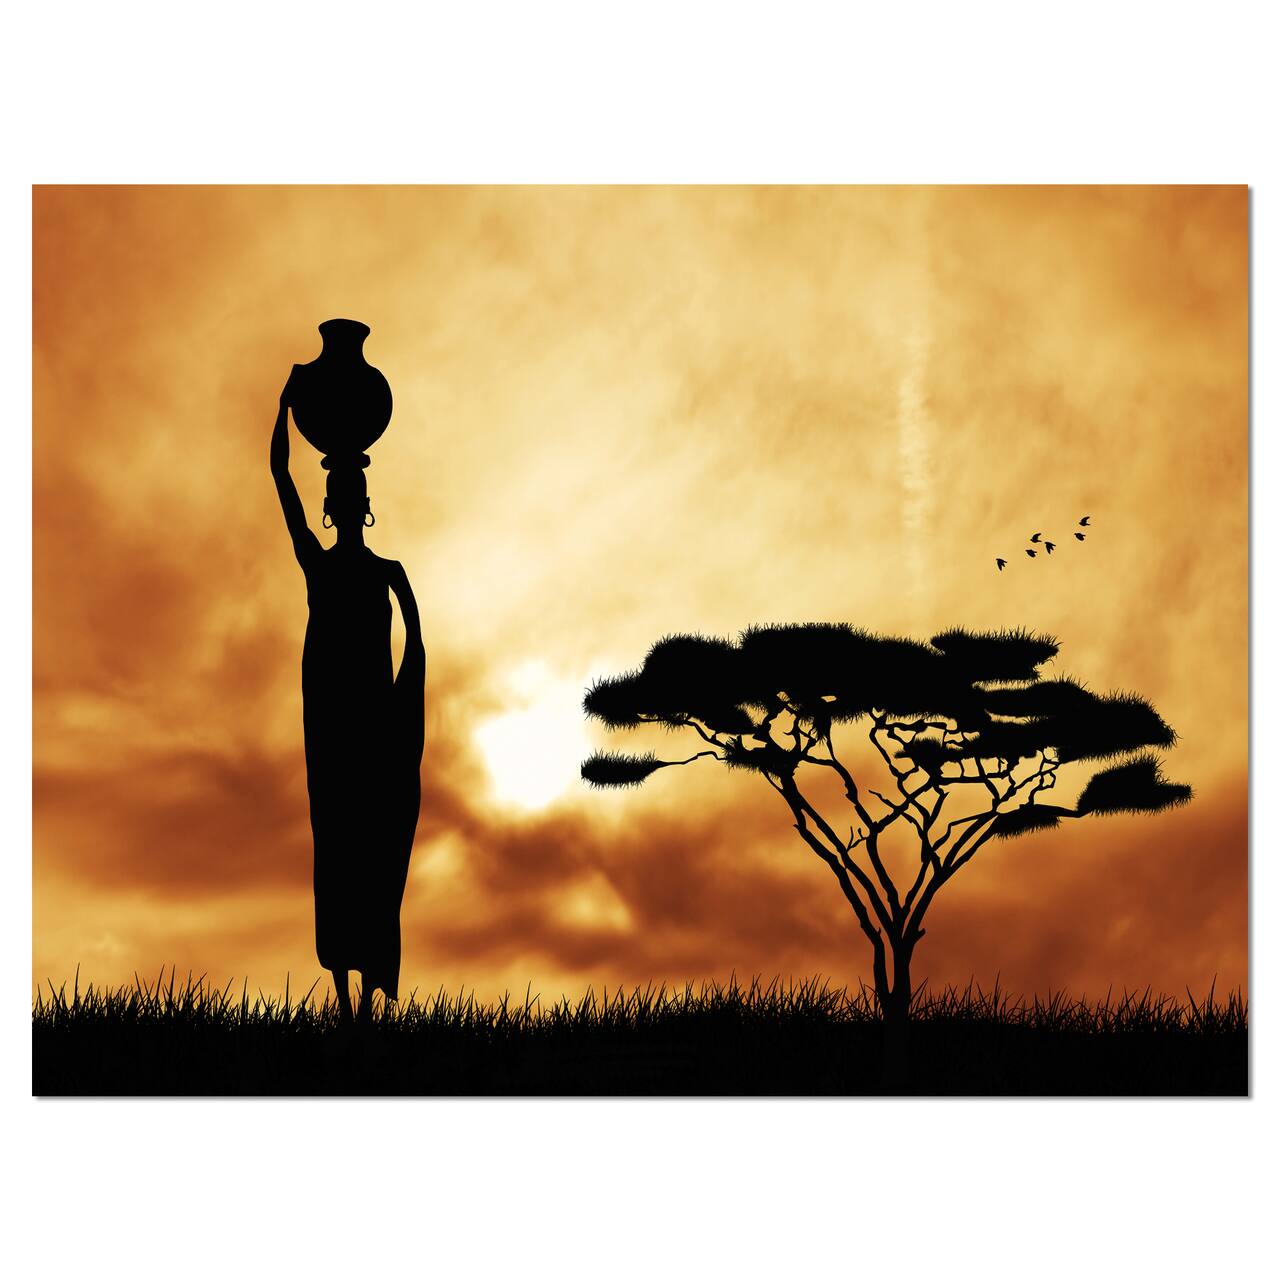 Designart - African Woman and Lonely Tree - African Landscape Canvas Art Print